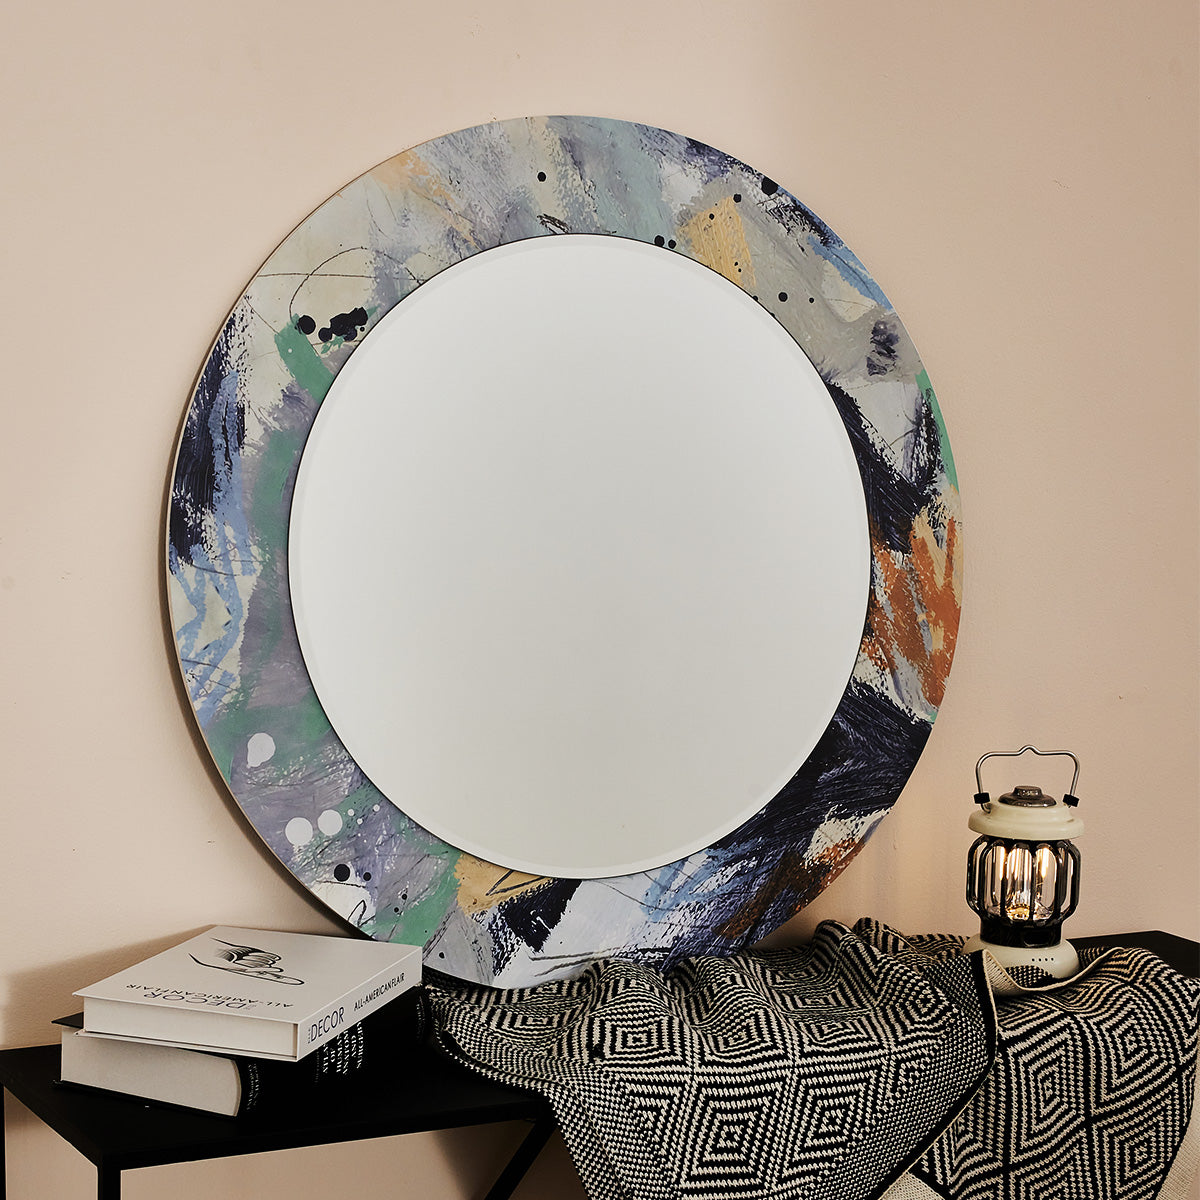 Creative Abstract Painted Mirror Wall Art  Decorative Round Mirror for Living Room